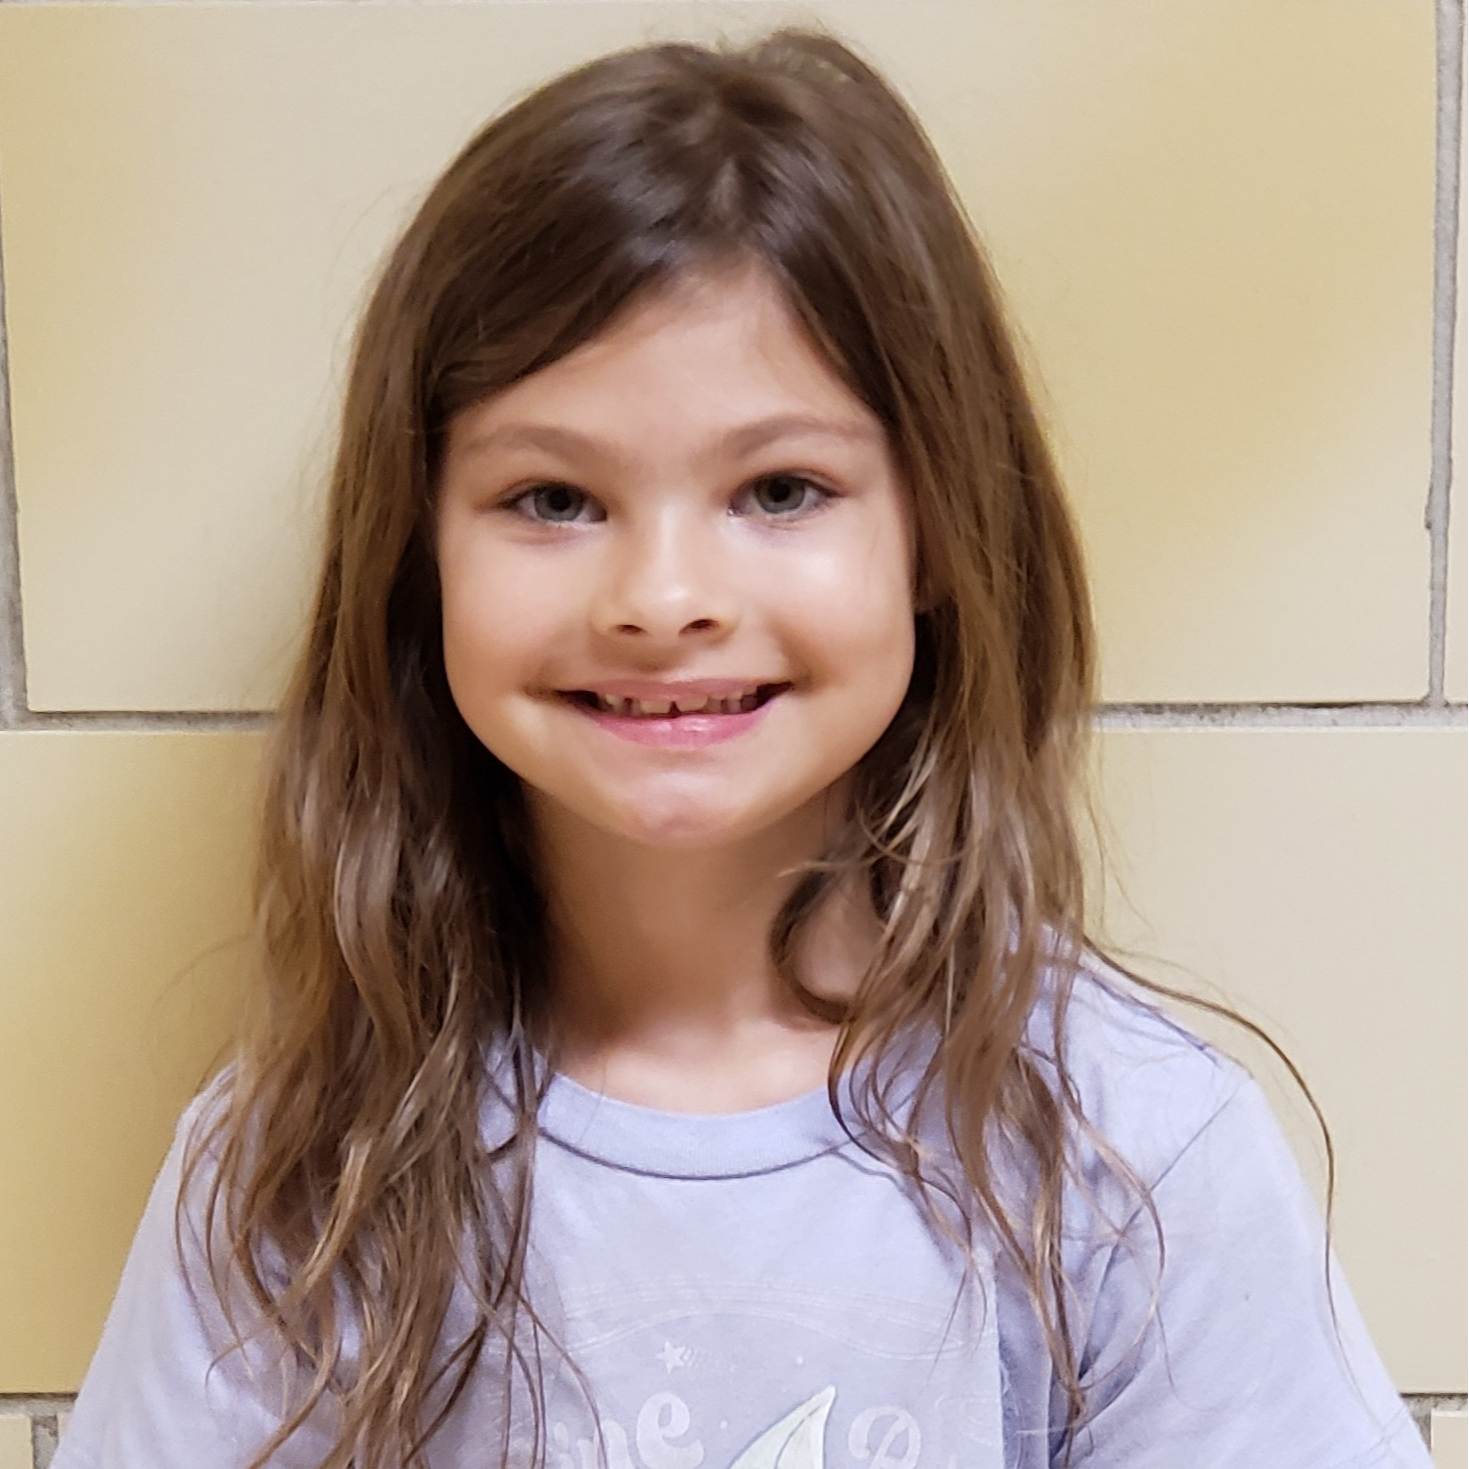 smiling young girl with brown hair  wearing a light purple t-shirt